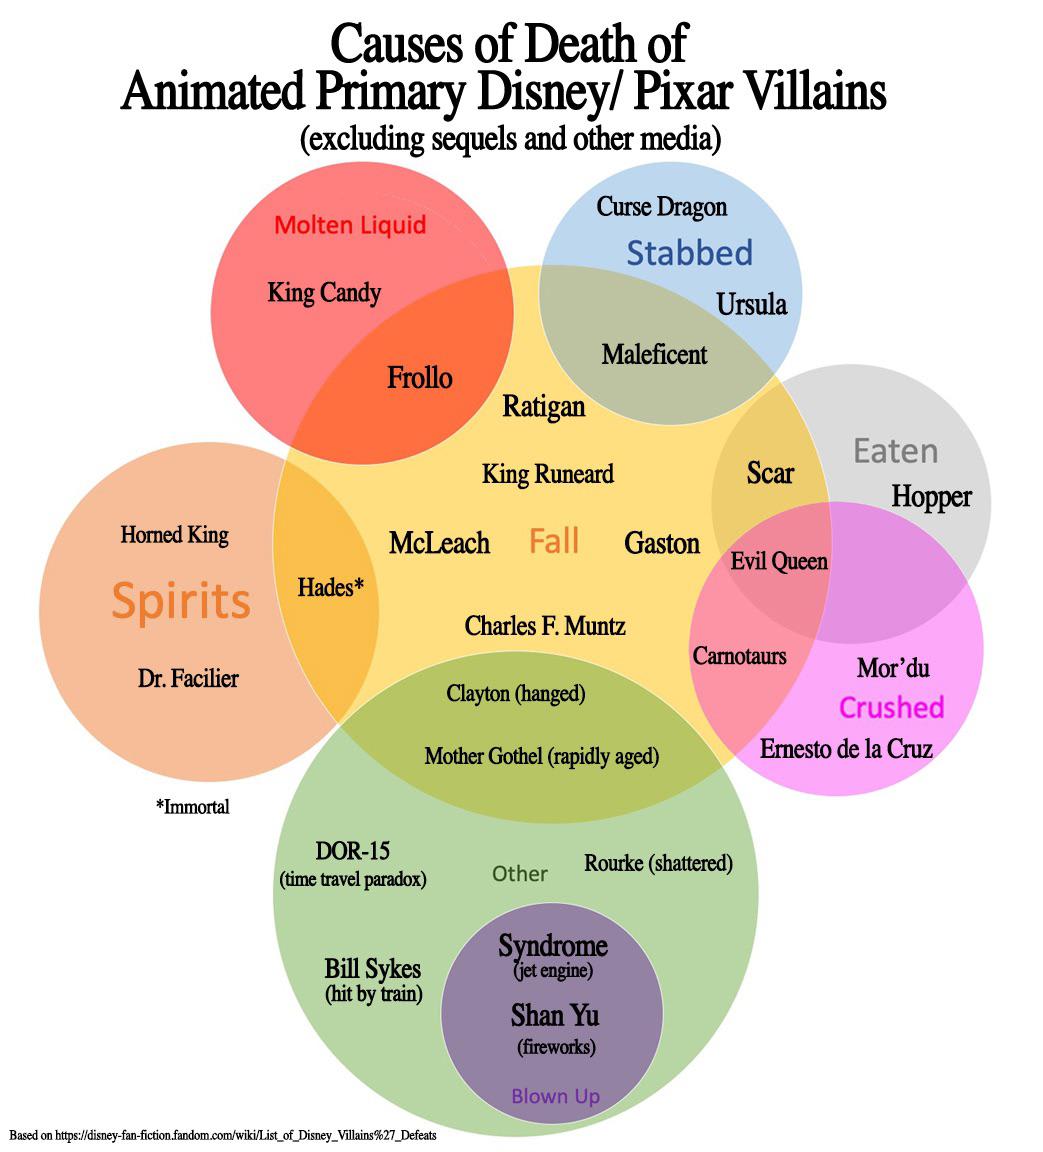 (Updated) Venn diagram of animated Disney and Pixar villains’ cause of death